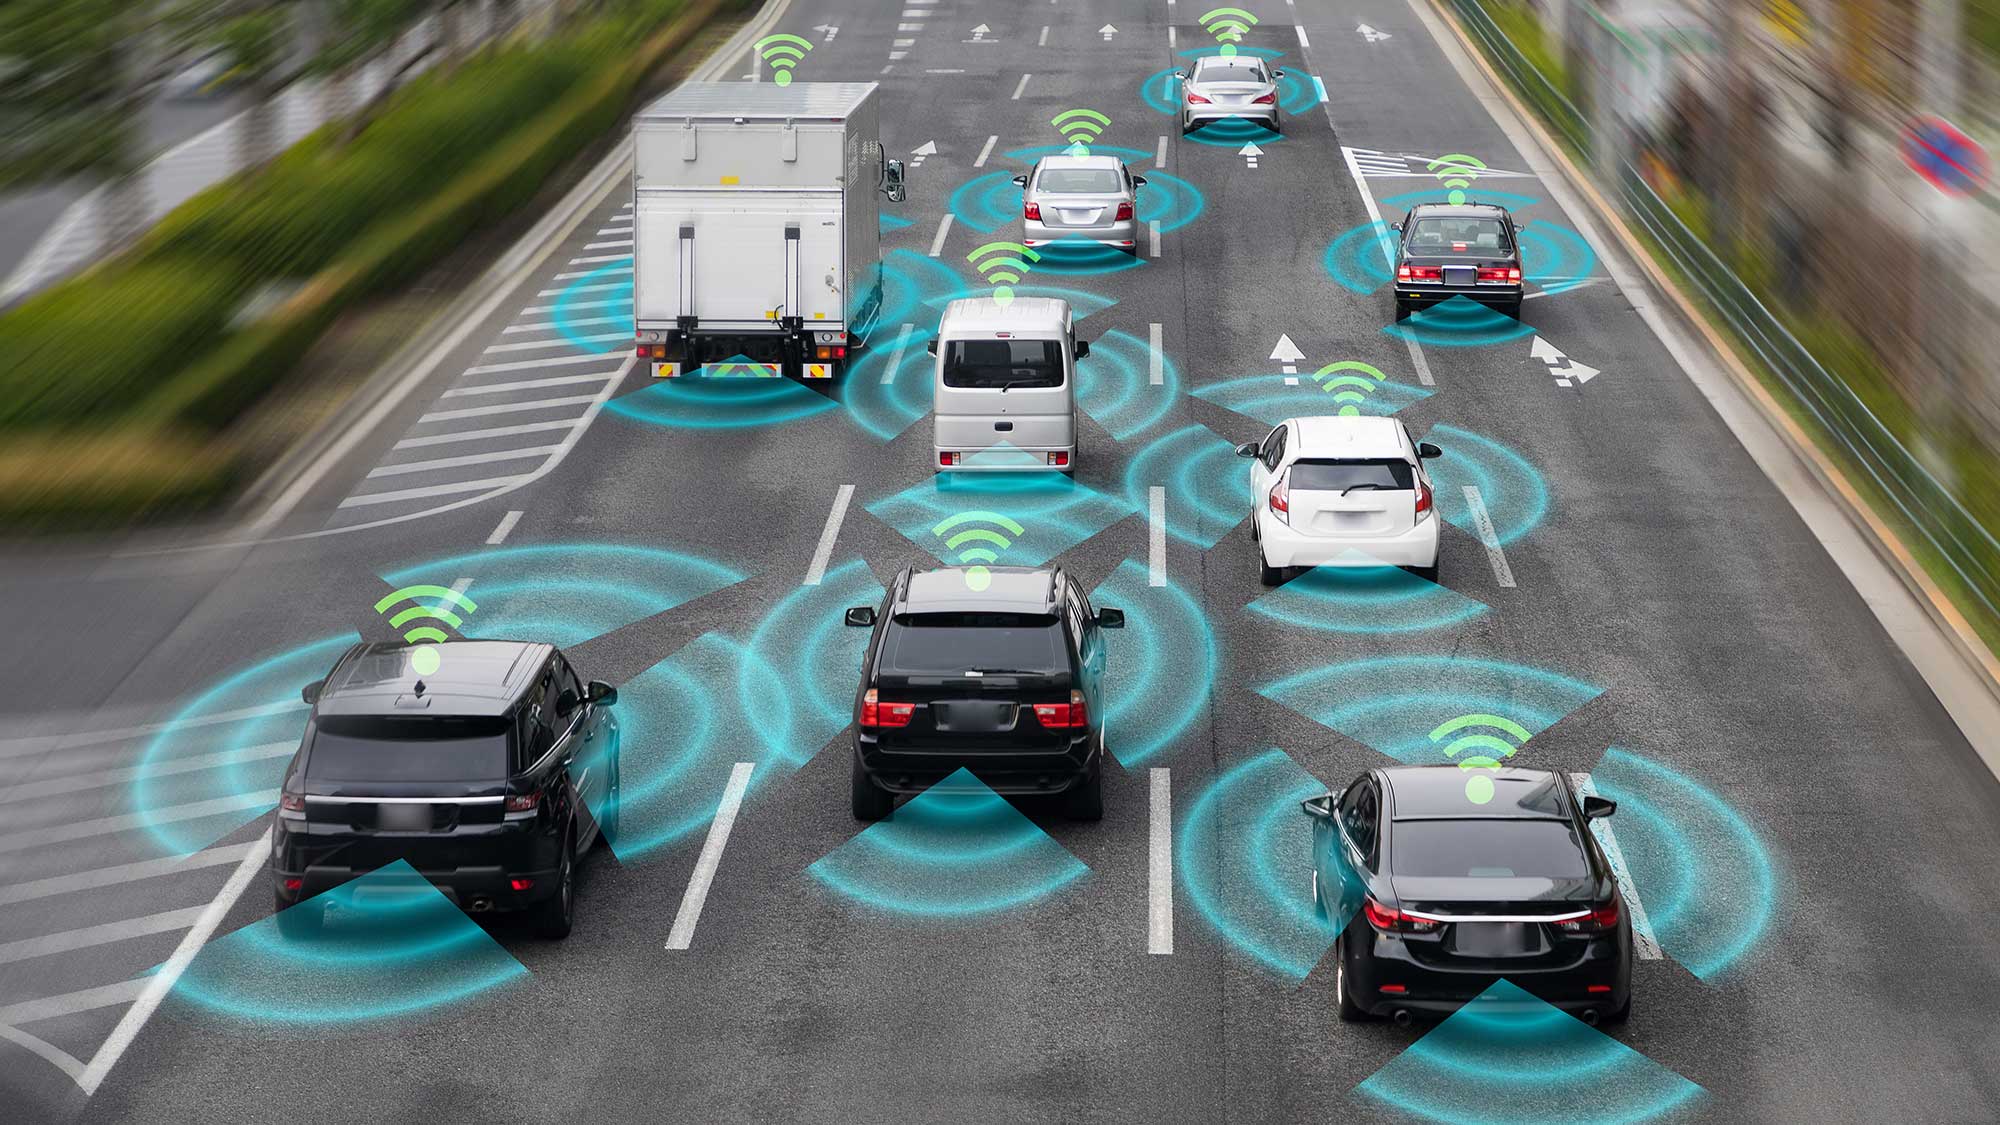 Stock image showing vehicles on a four-lane motorway with wireless symbols between them.